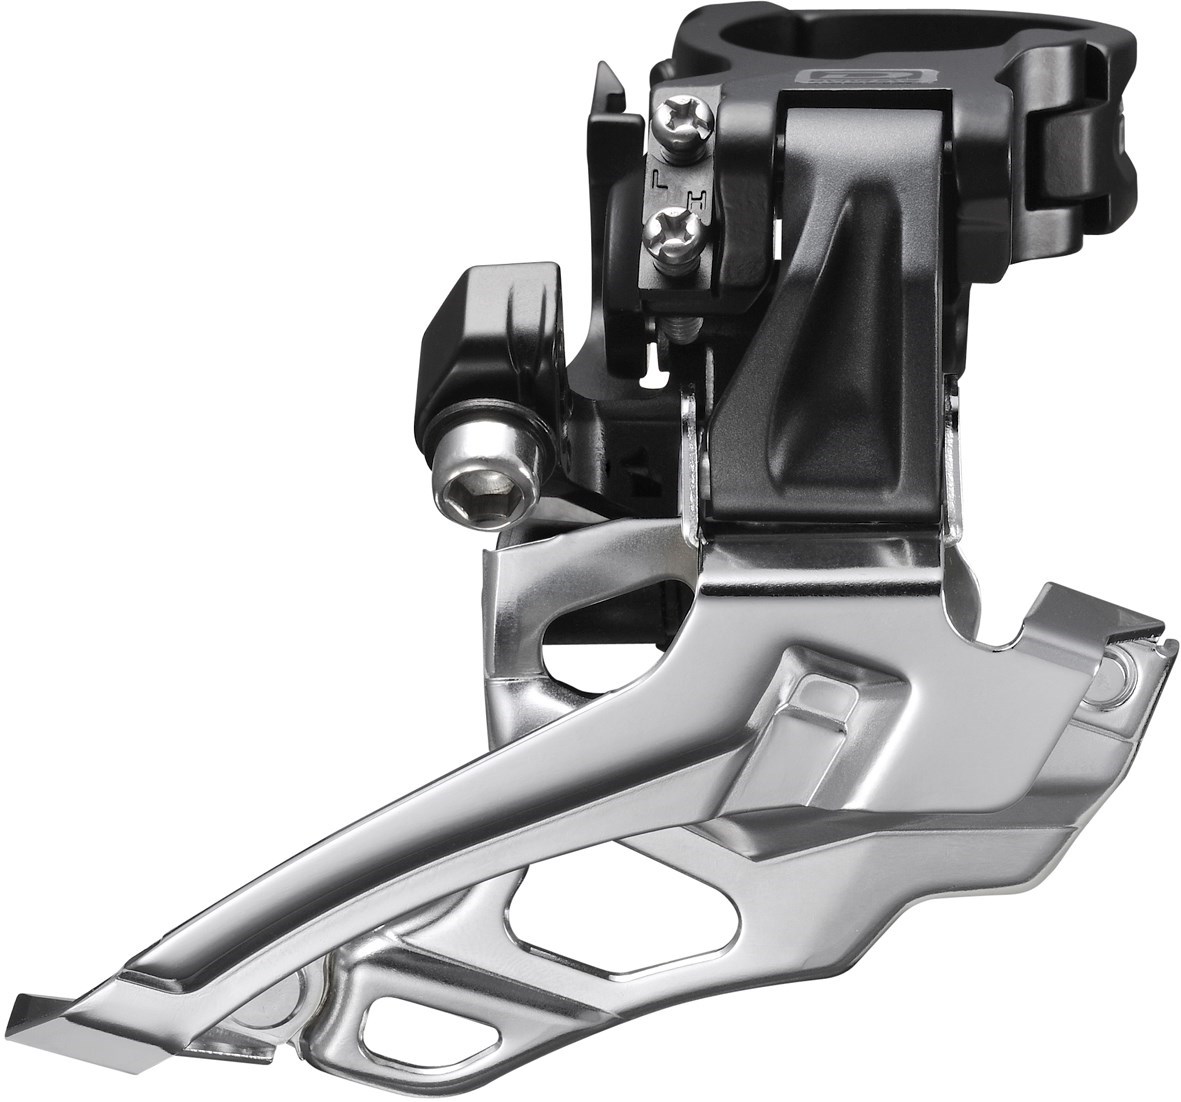 Shimano FD-M616 Deore 10-Speed Double Front Derailleur - Conventional Swing - Top-Pull product image